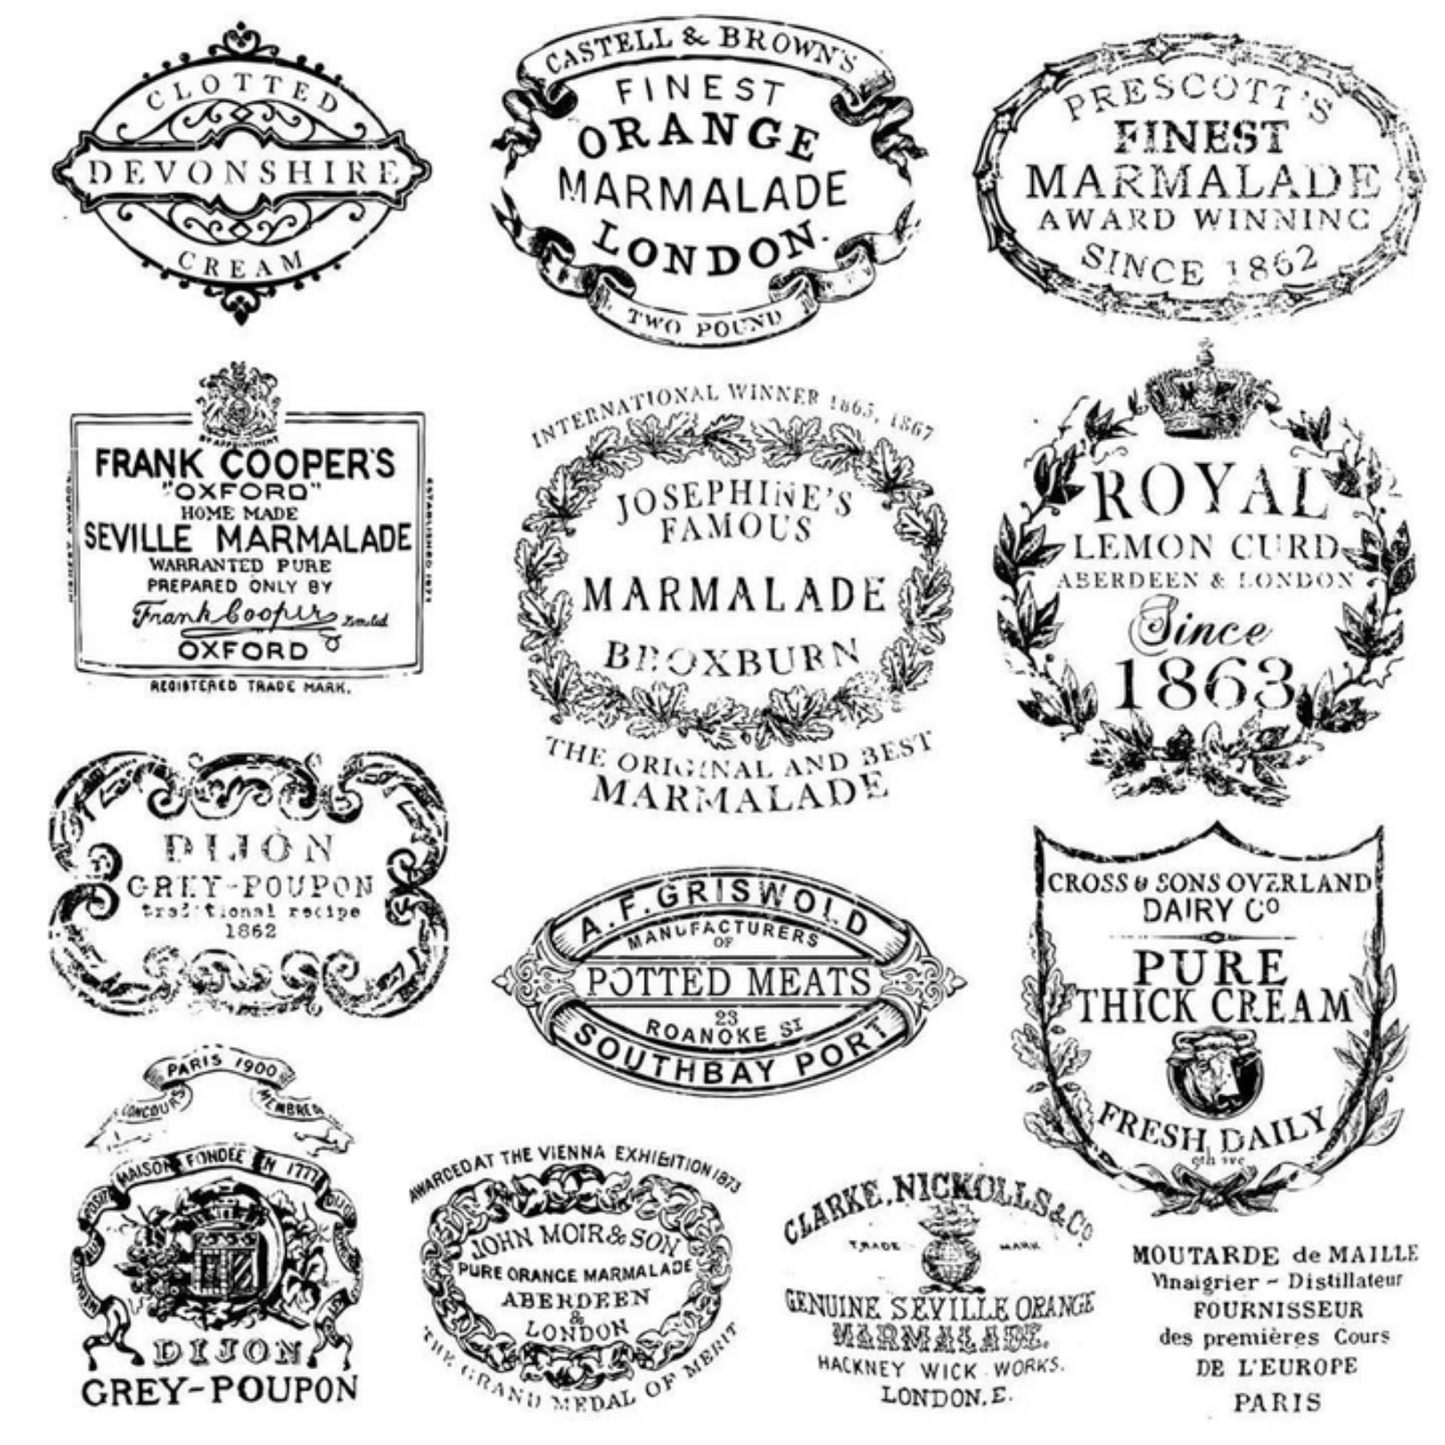 Thirteen different styles of vintage style crockery labels at Milton's Daughter.